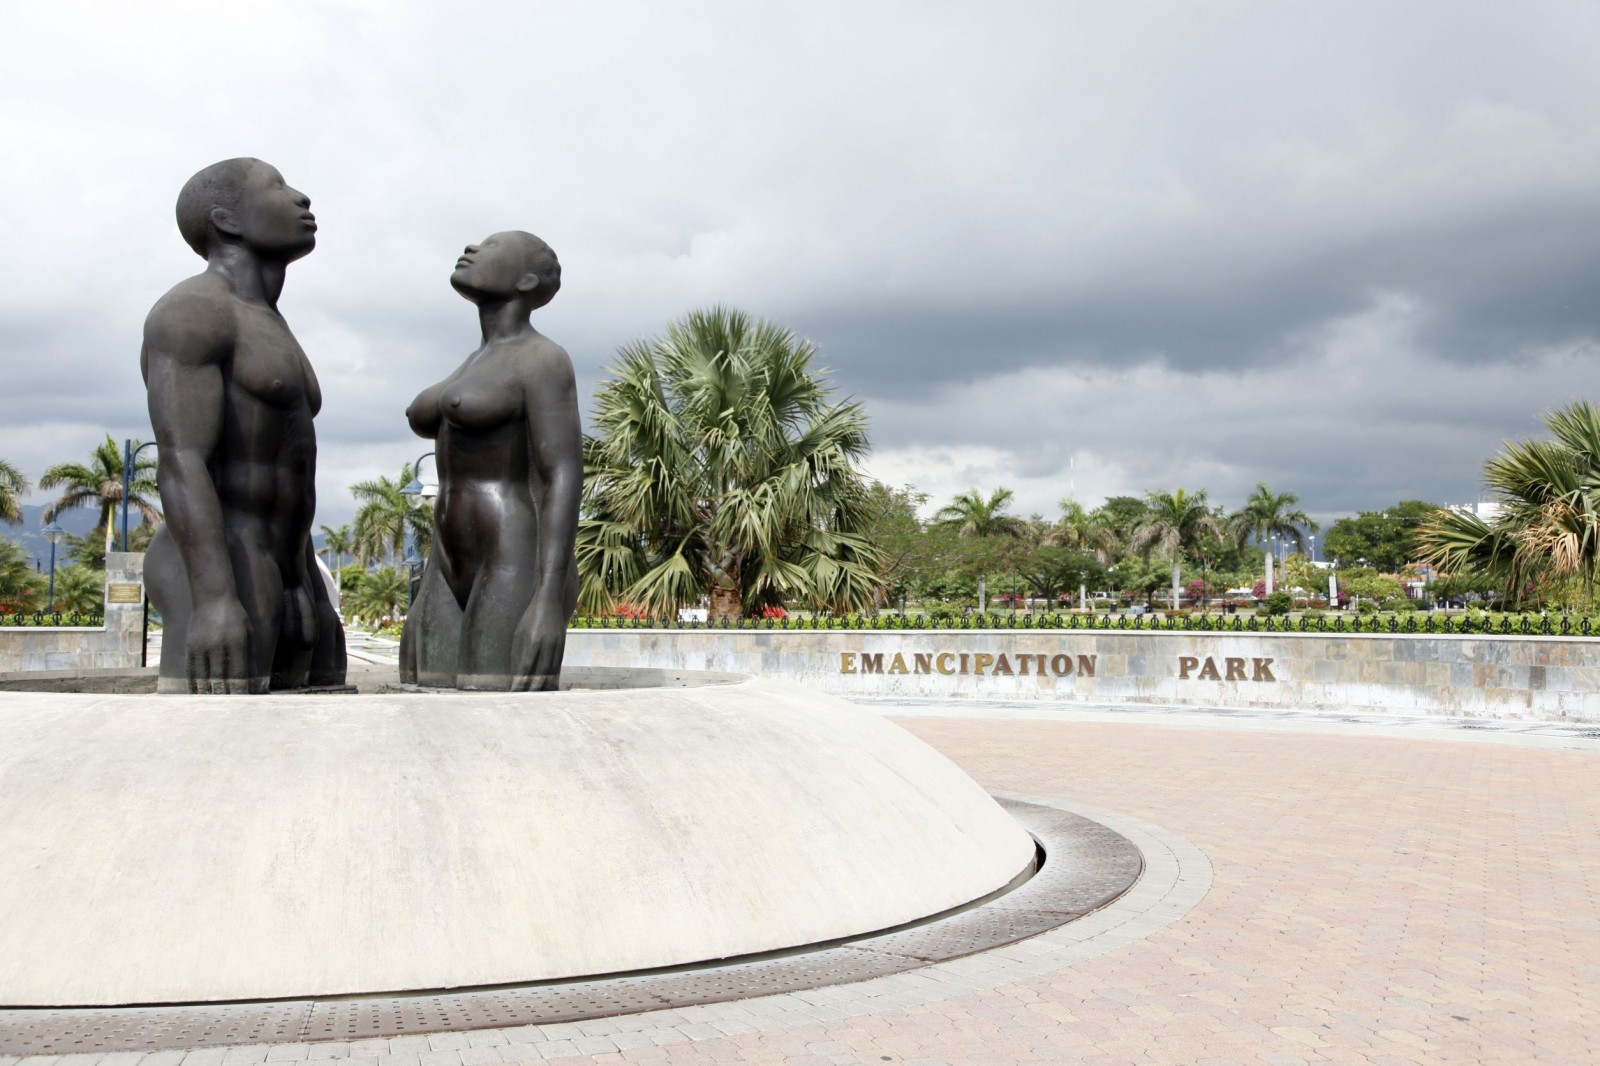 redemption-song-monument-in-emancipation-park-in-kingston-jamaica-1600x1066